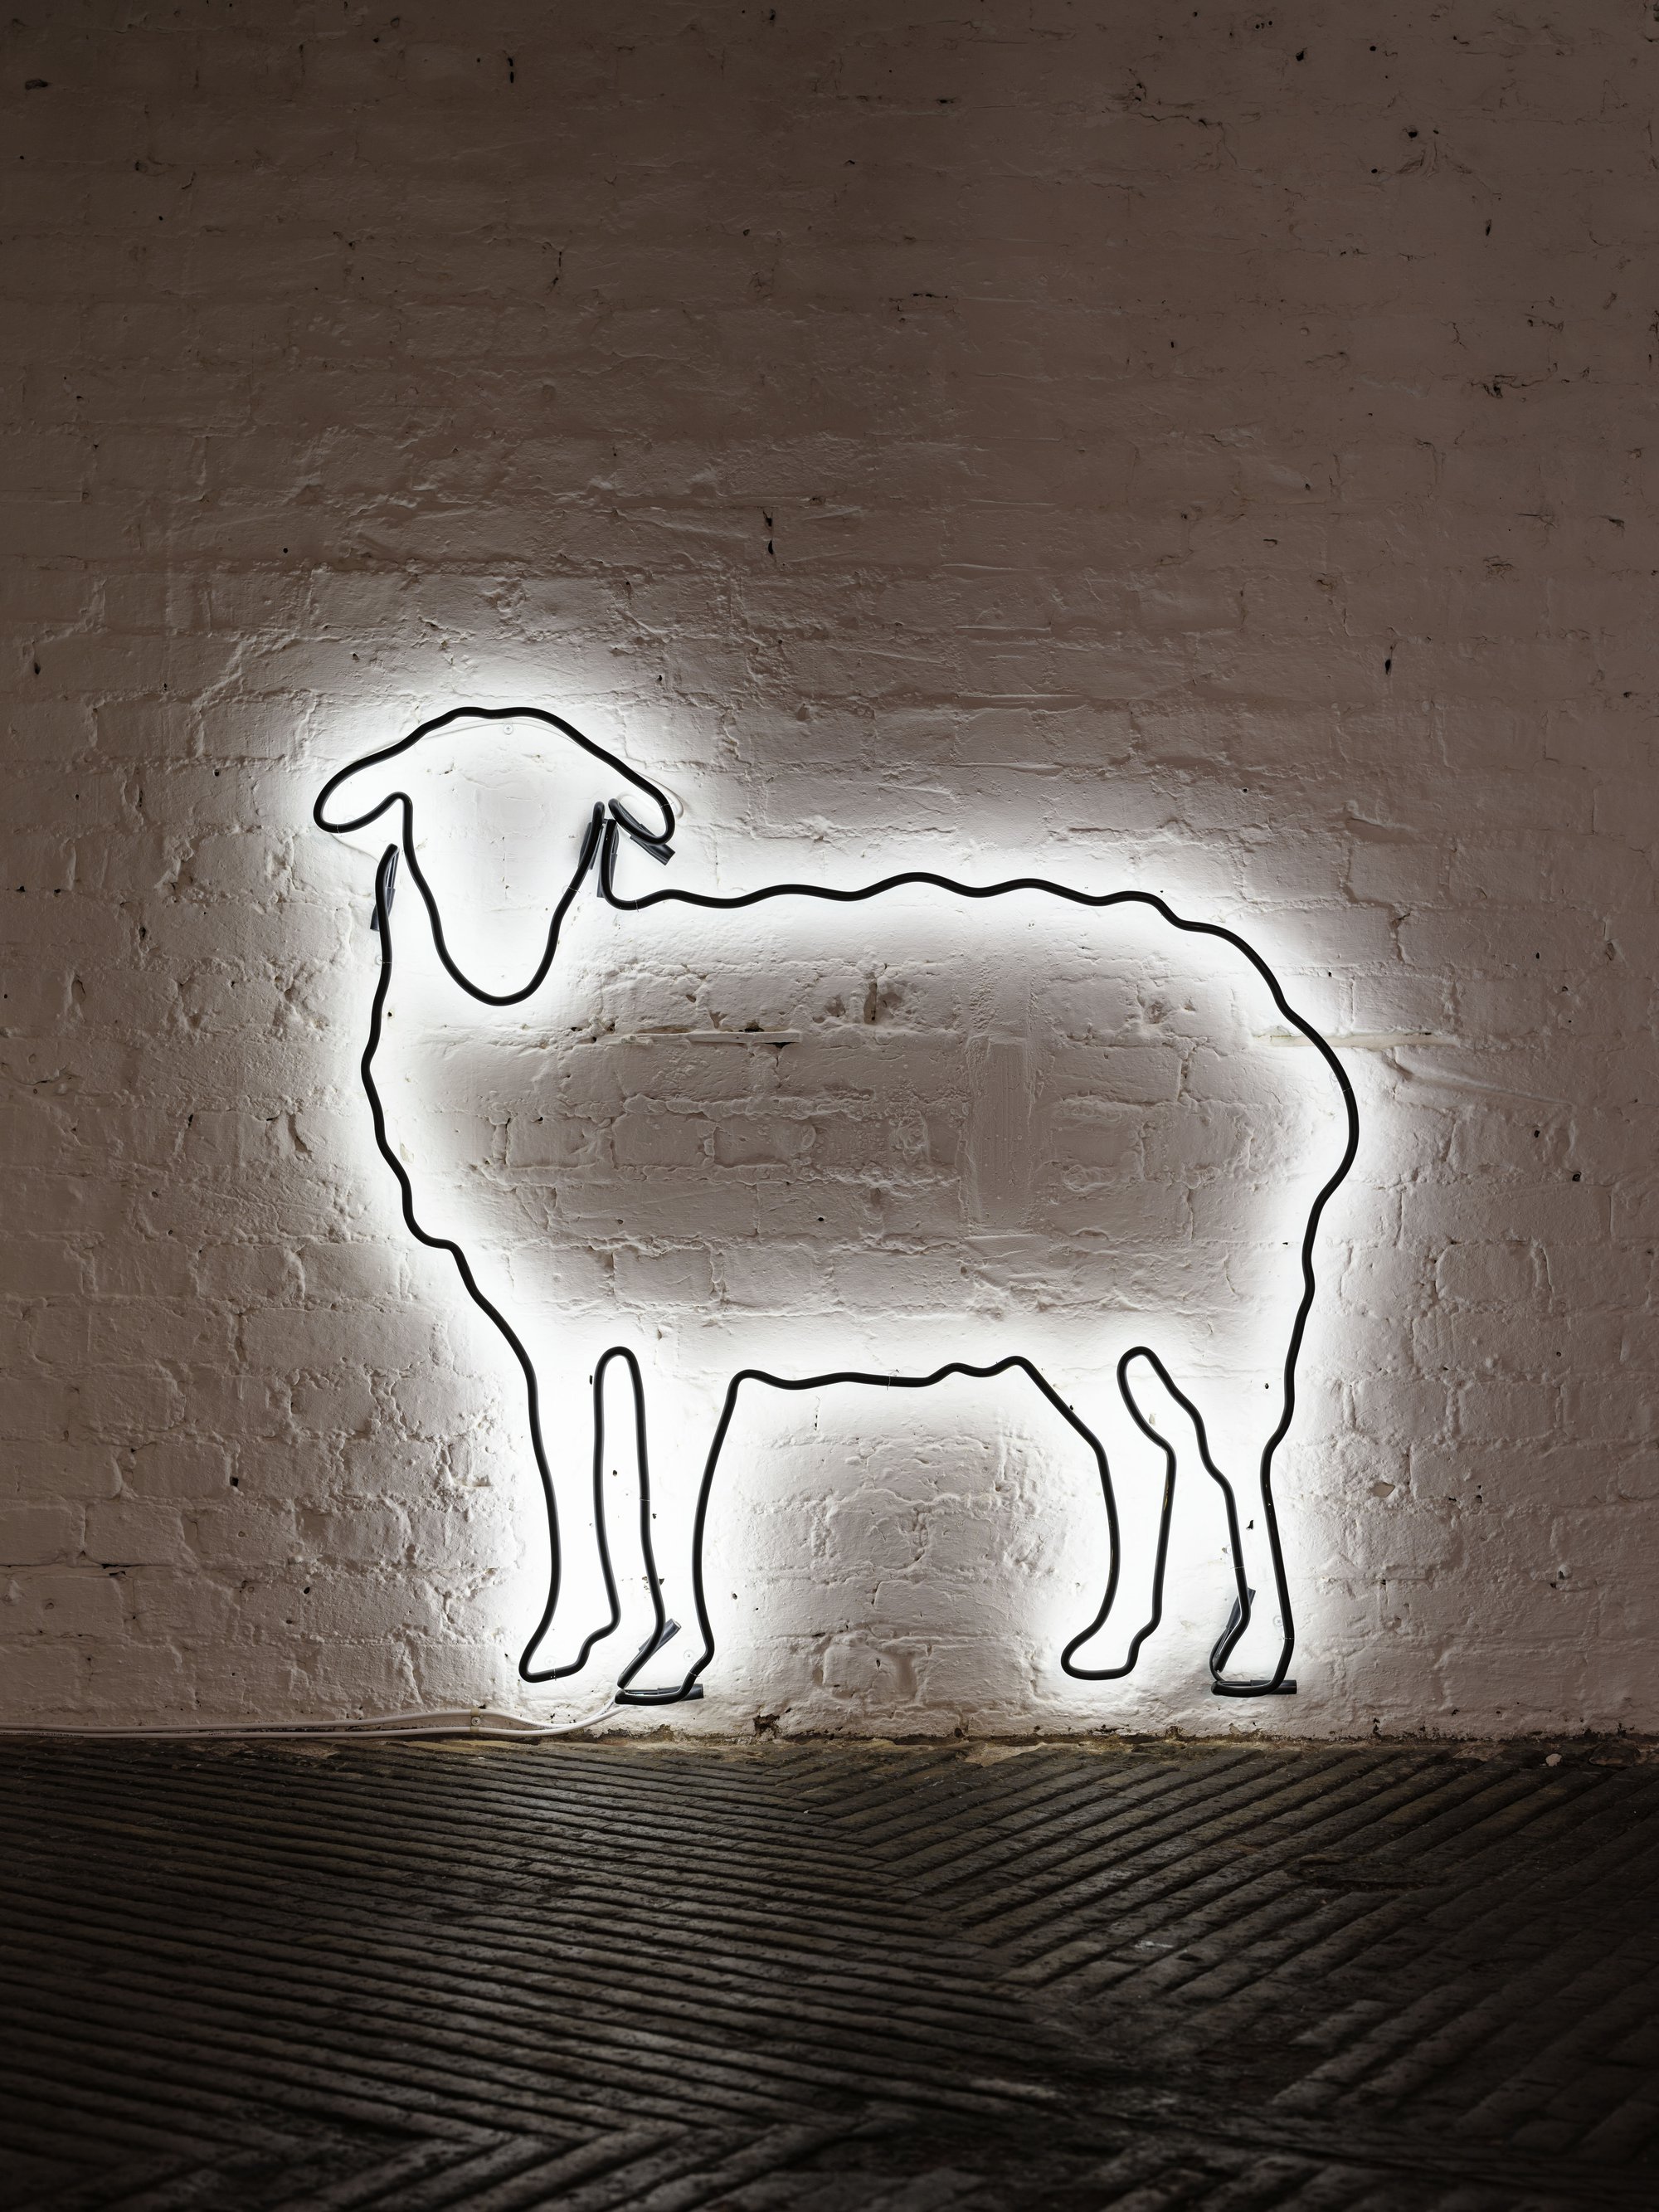 Liliana Moro, Black Sheep, Hand-painted neon, 100 x 120 cm (39 3/8 x 47 1/4 in), 2024. Installation view, In No Time, Rodeo, London, 2024